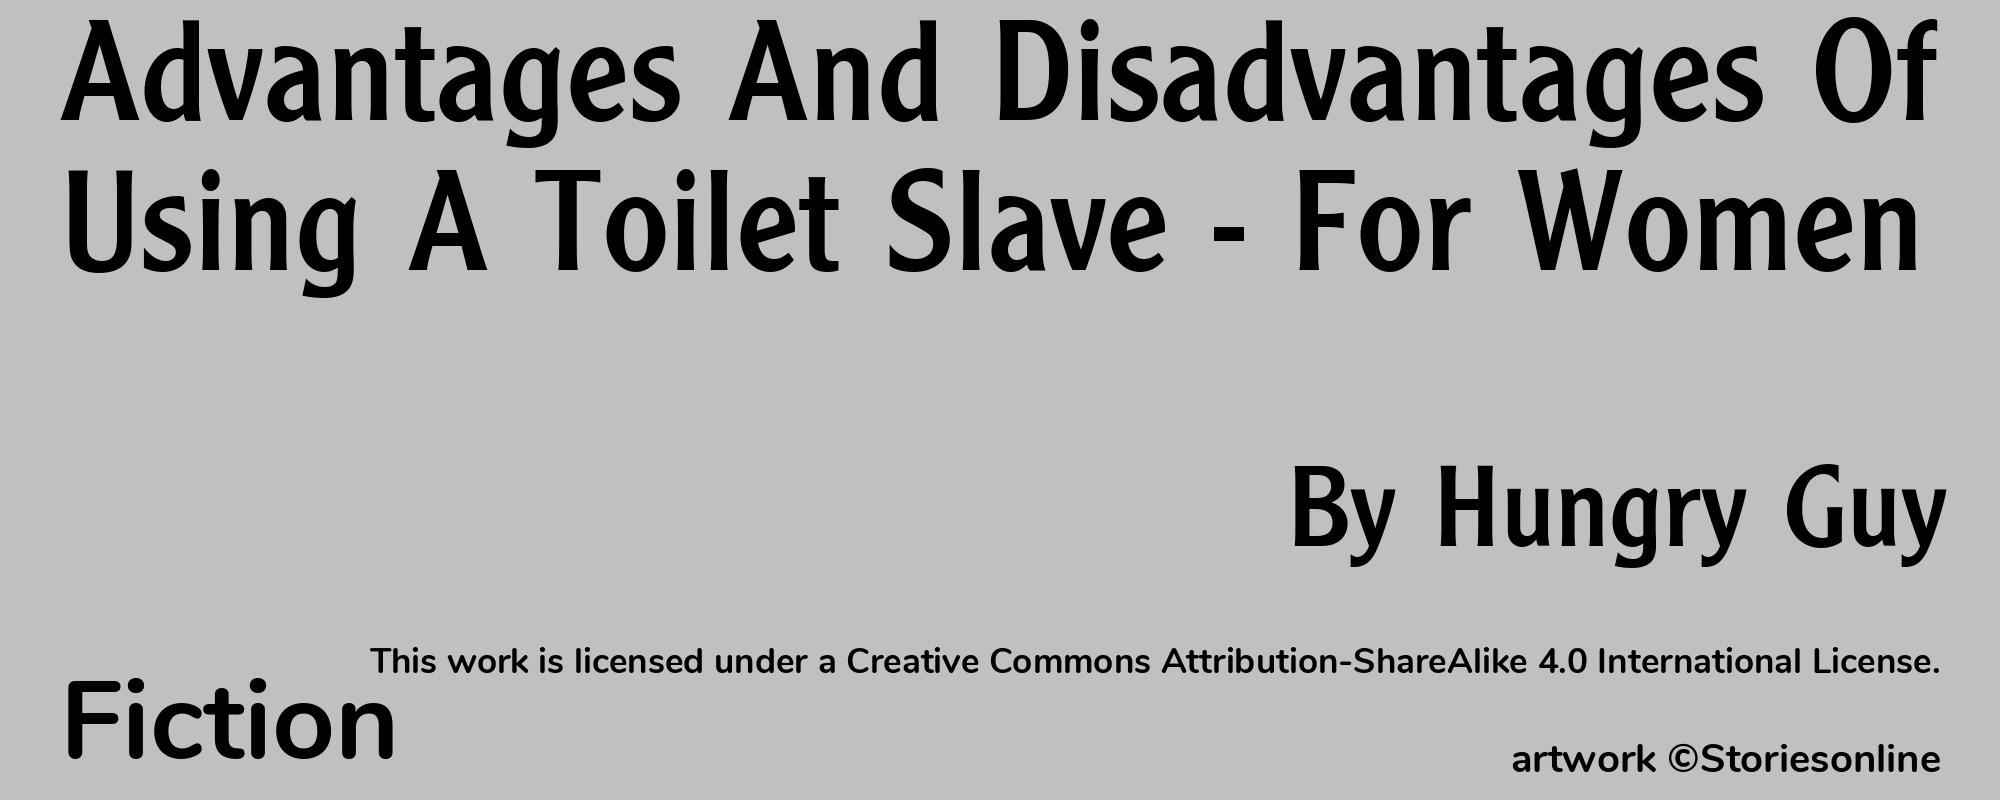 Advantages And Disadvantages Of Using A Toilet Slave - For Women - Cover